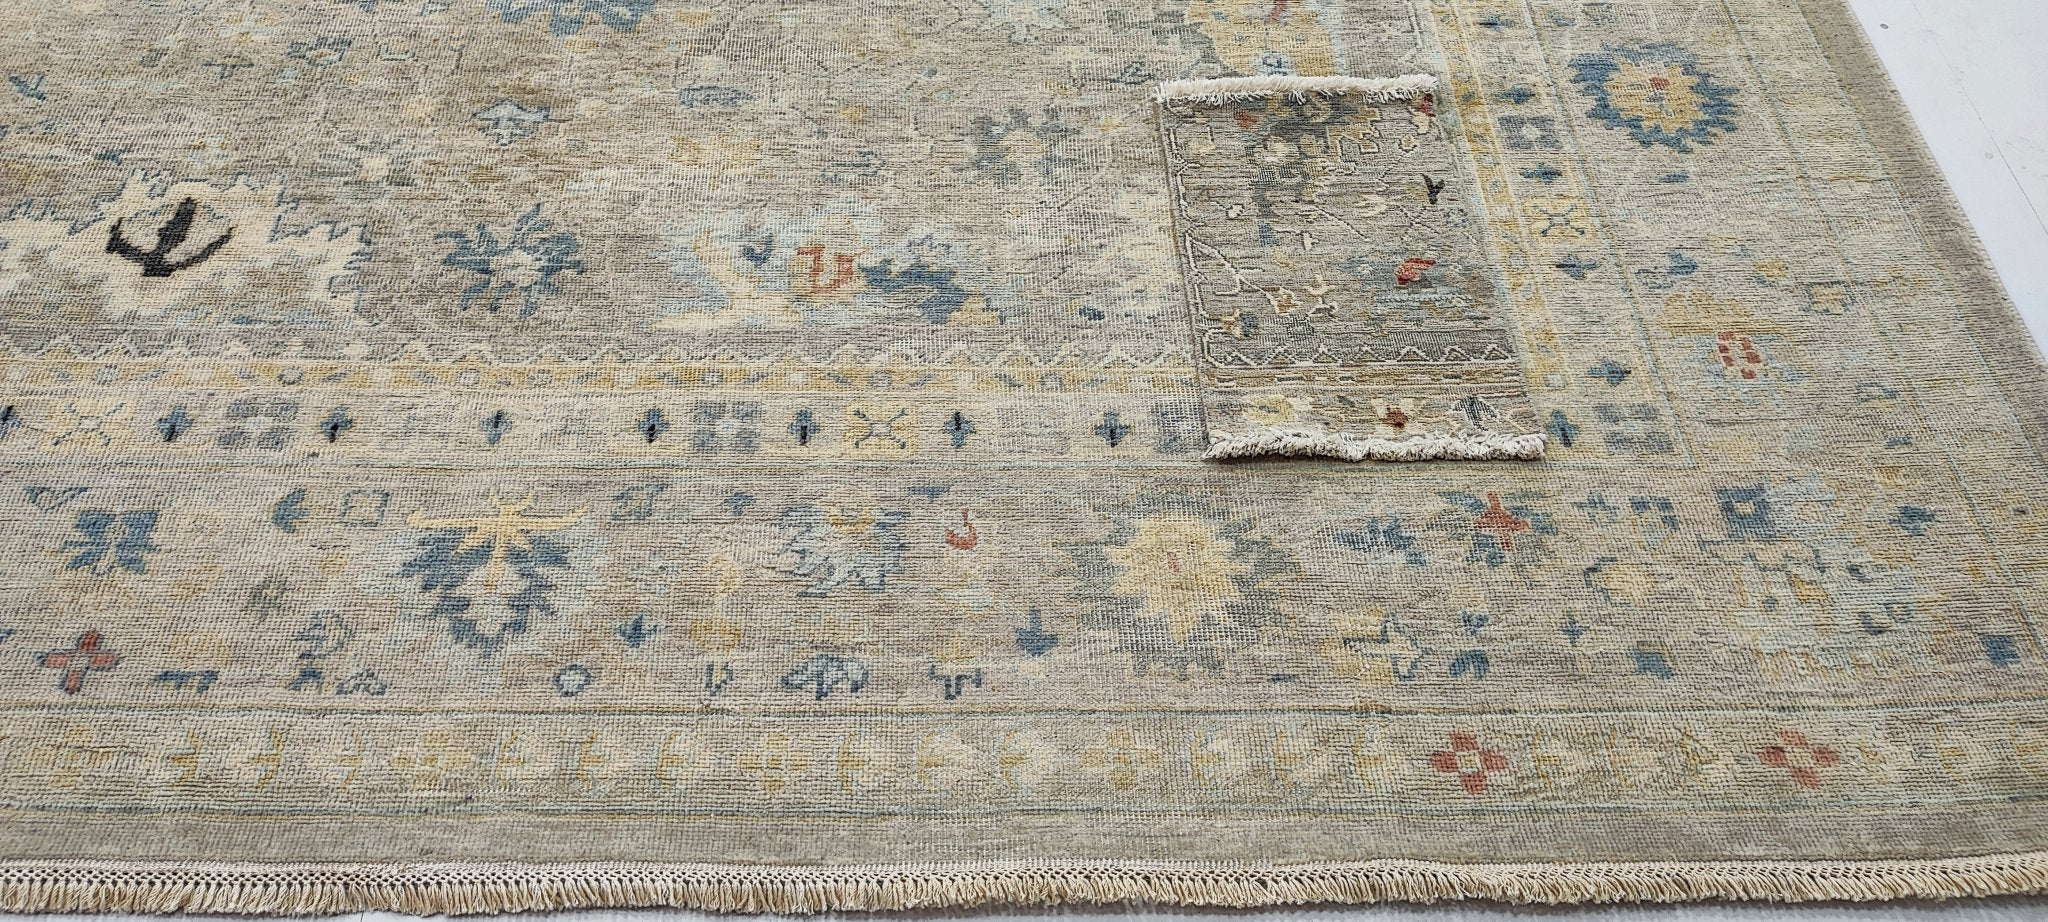 Tom & Marie 9x12 Homage to Antique Hand-Knotted Rug | Banana Manor Rug Factory Outlet